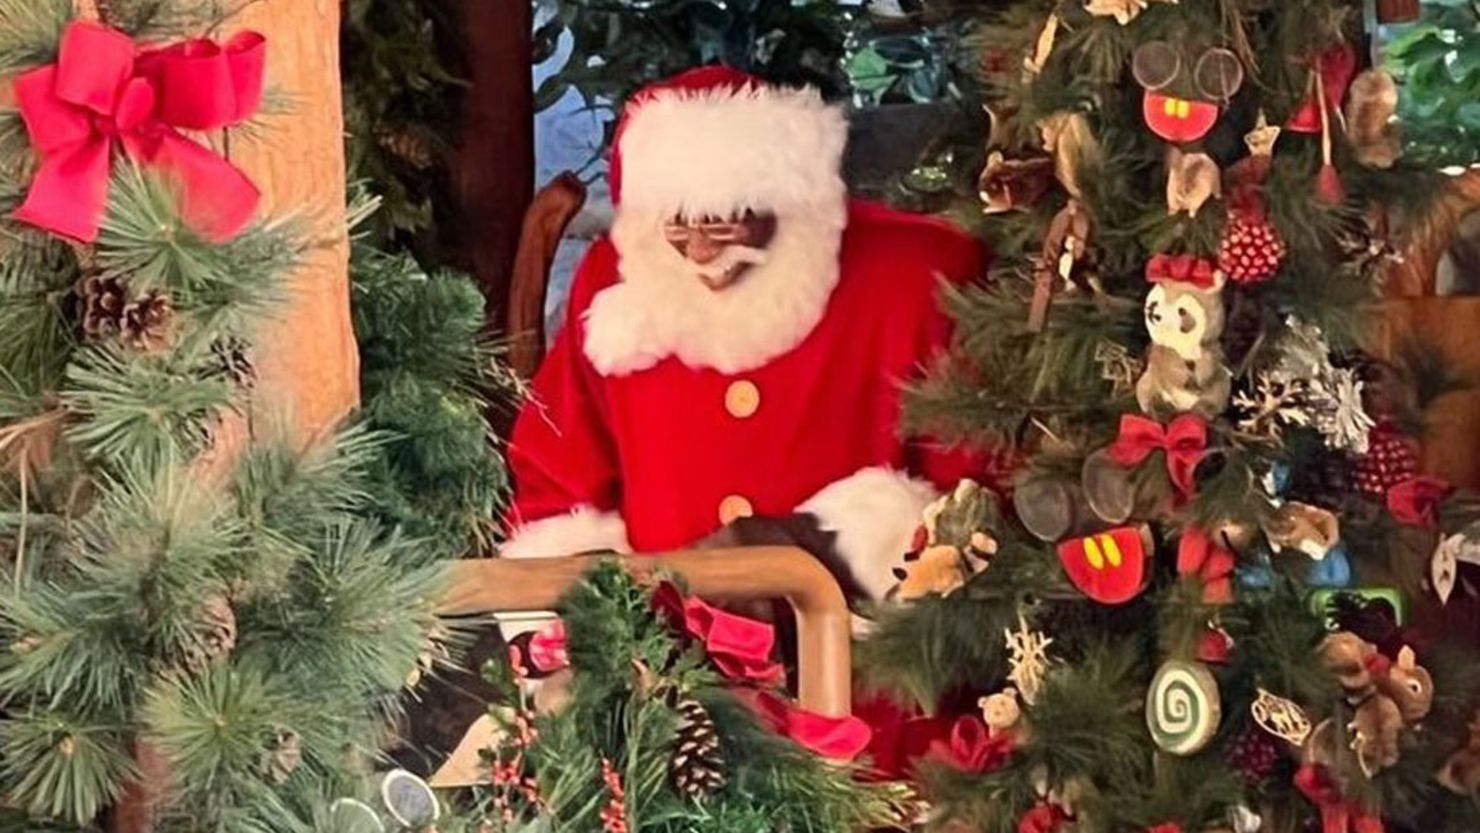 Disney parks in the US are including a Black Santa Claus in Christmas celebrations this year for the first time.